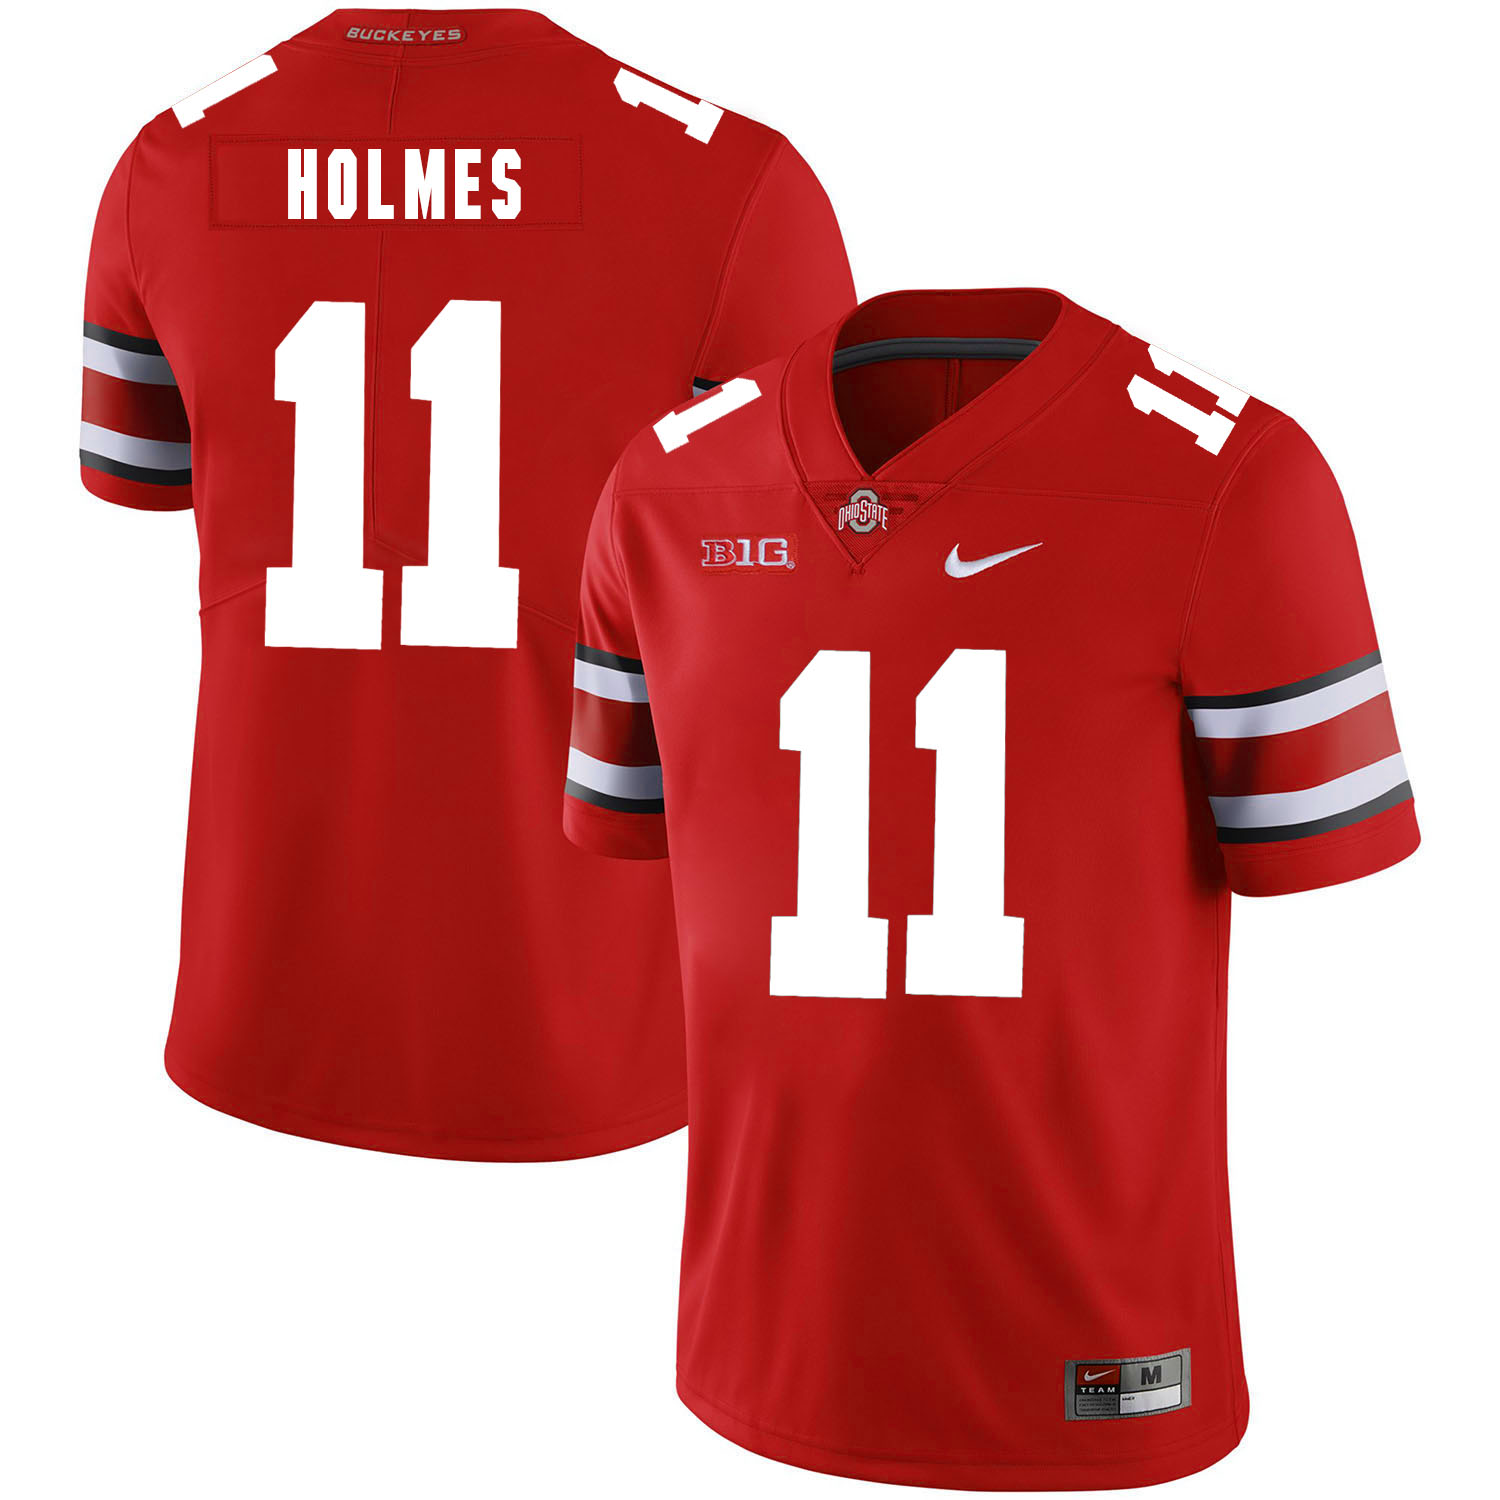 Ohio State Buckeyes 11 Jalyn Holmes Red Nike College Football Jersey